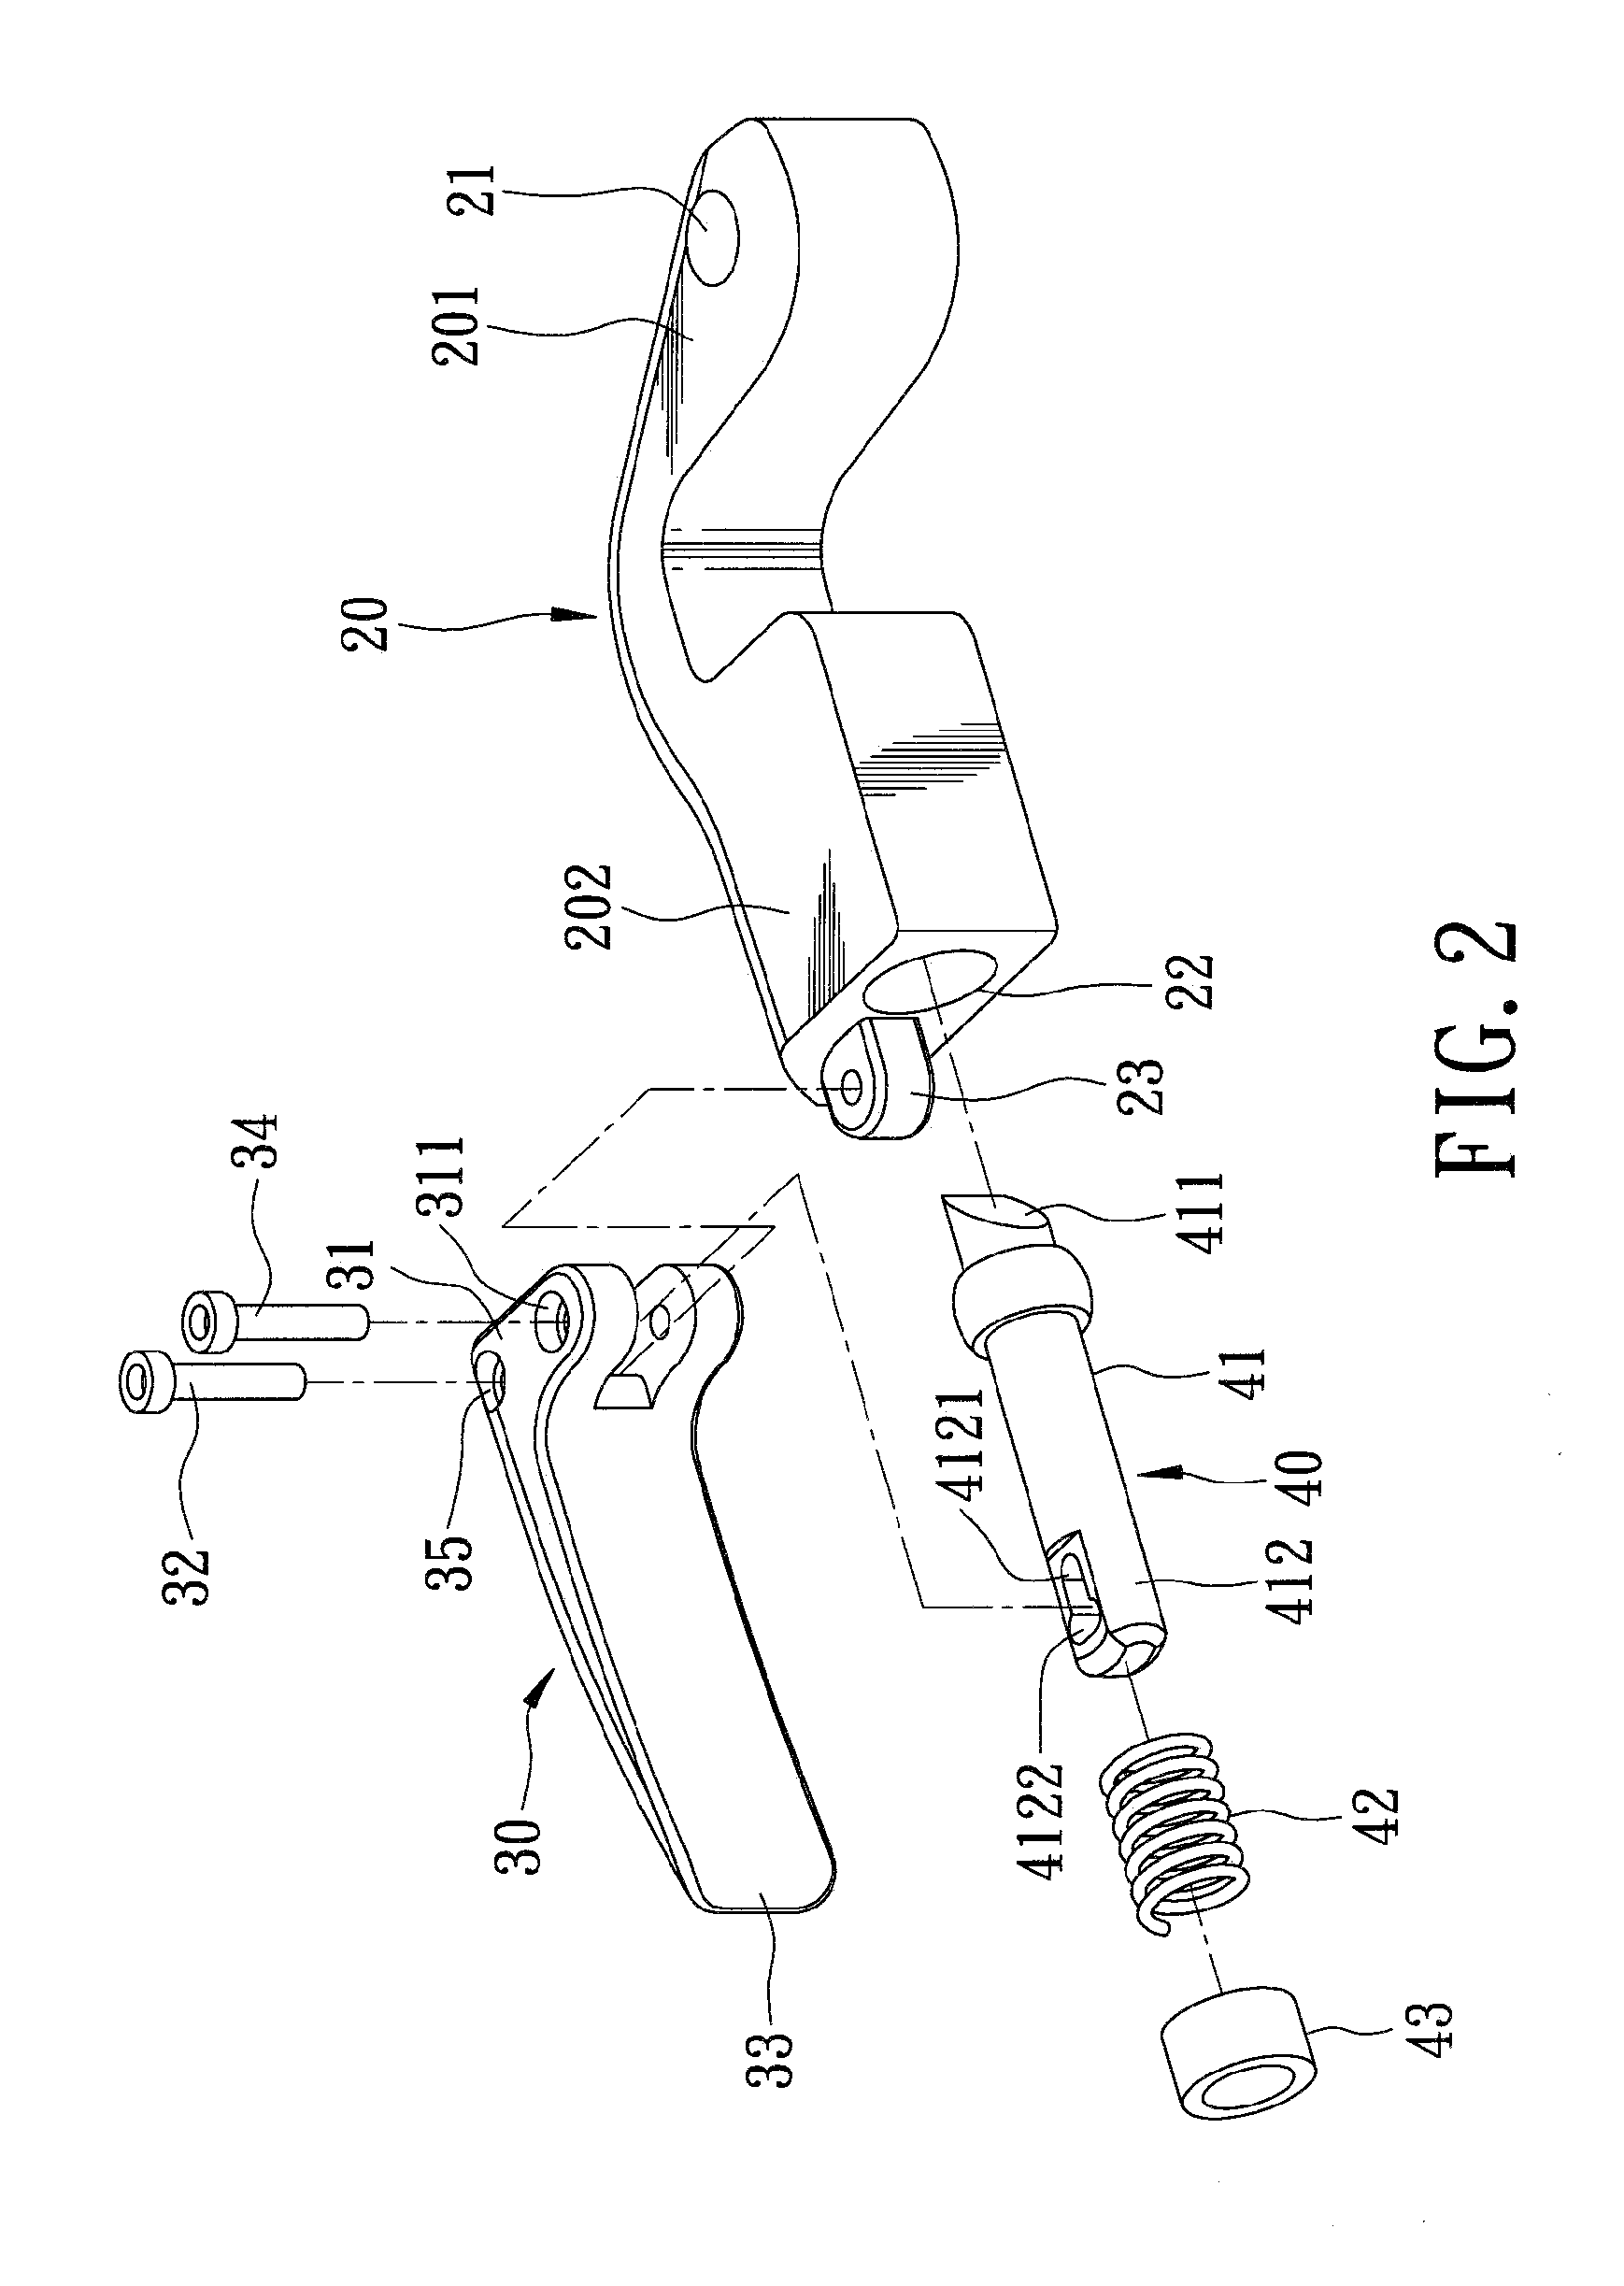 Easily unlatchable cam-lock actuating device for use in a locking coupling assembly that couples two tubular members